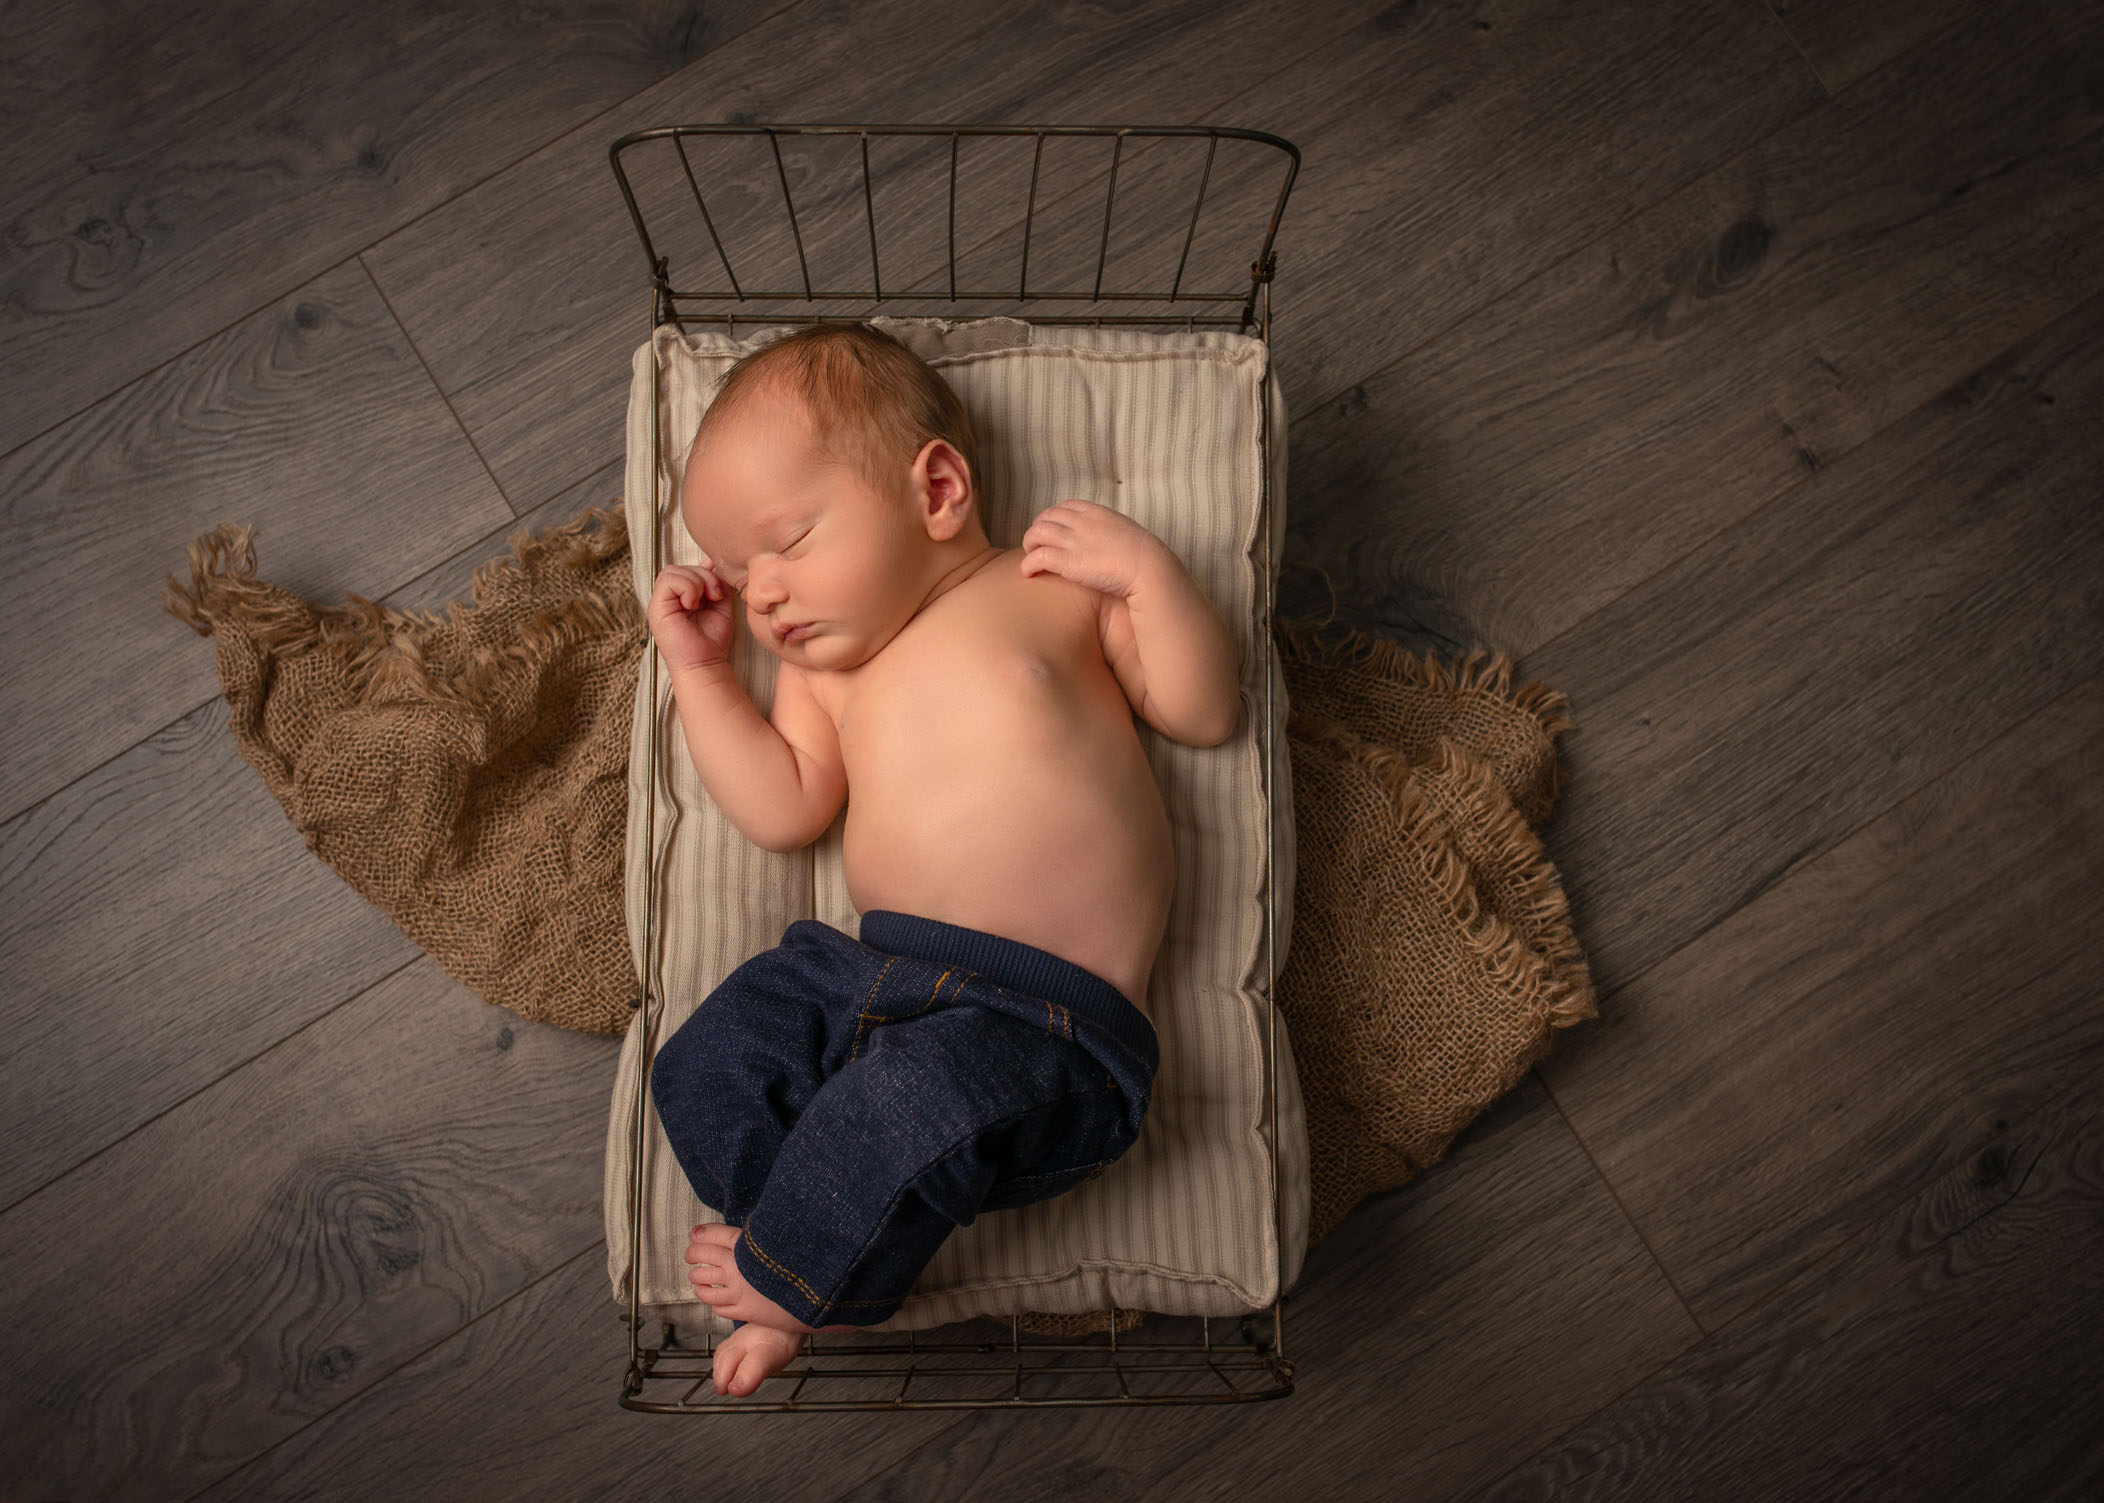 Newborn baby boy sleeping on old fashioned cot wearing jeans